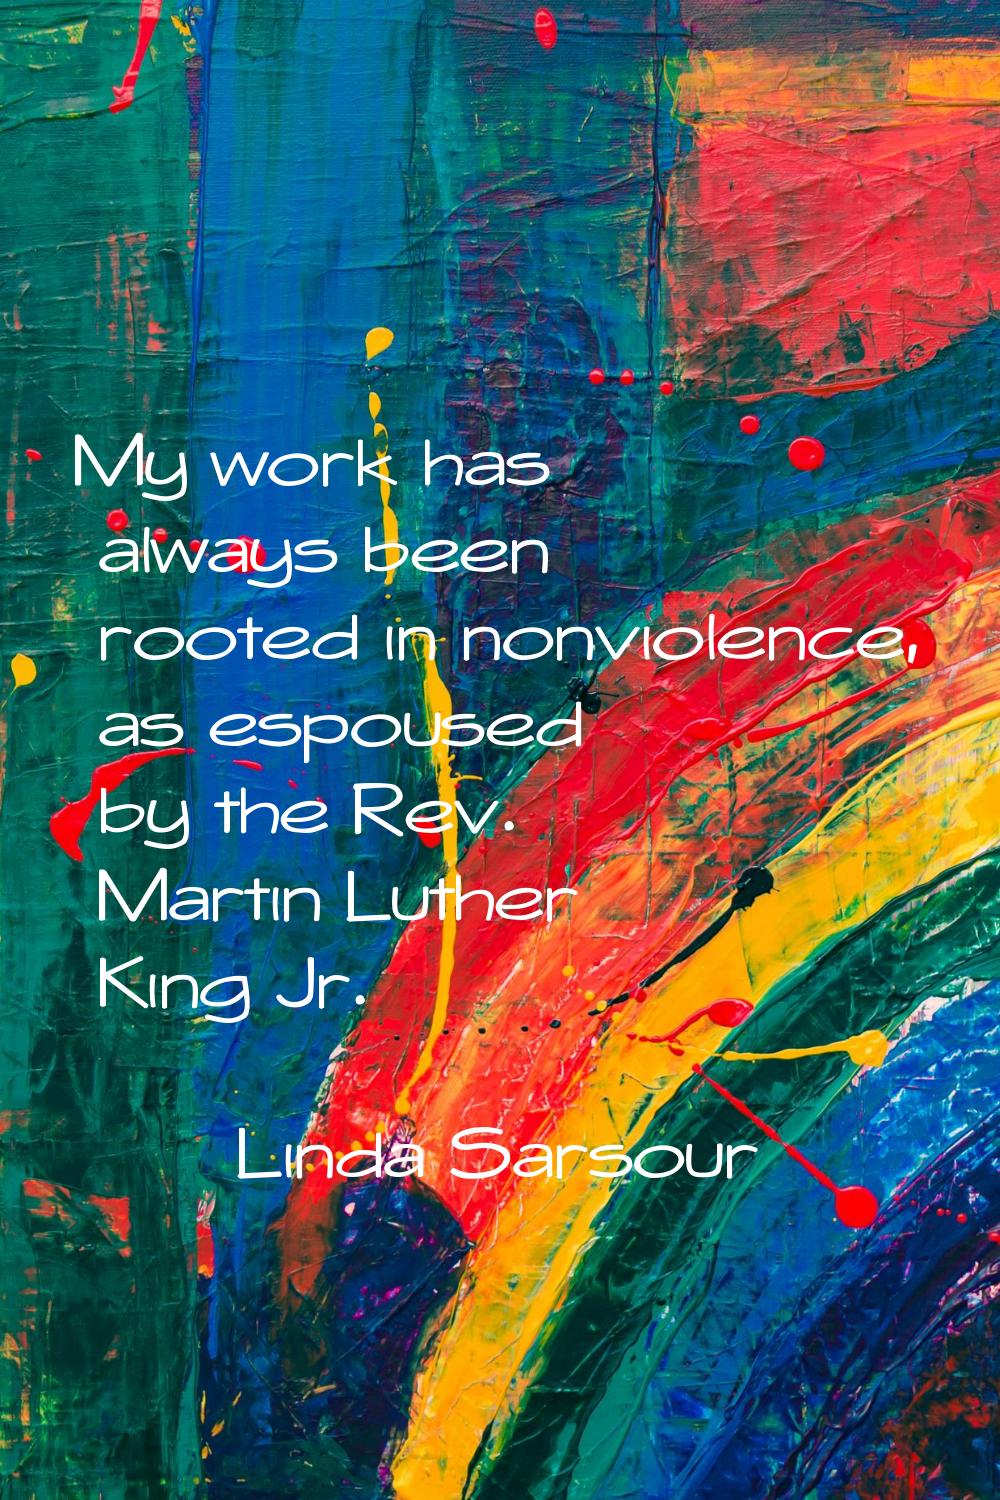 My work has always been rooted in nonviolence, as espoused by the Rev. Martin Luther King Jr.